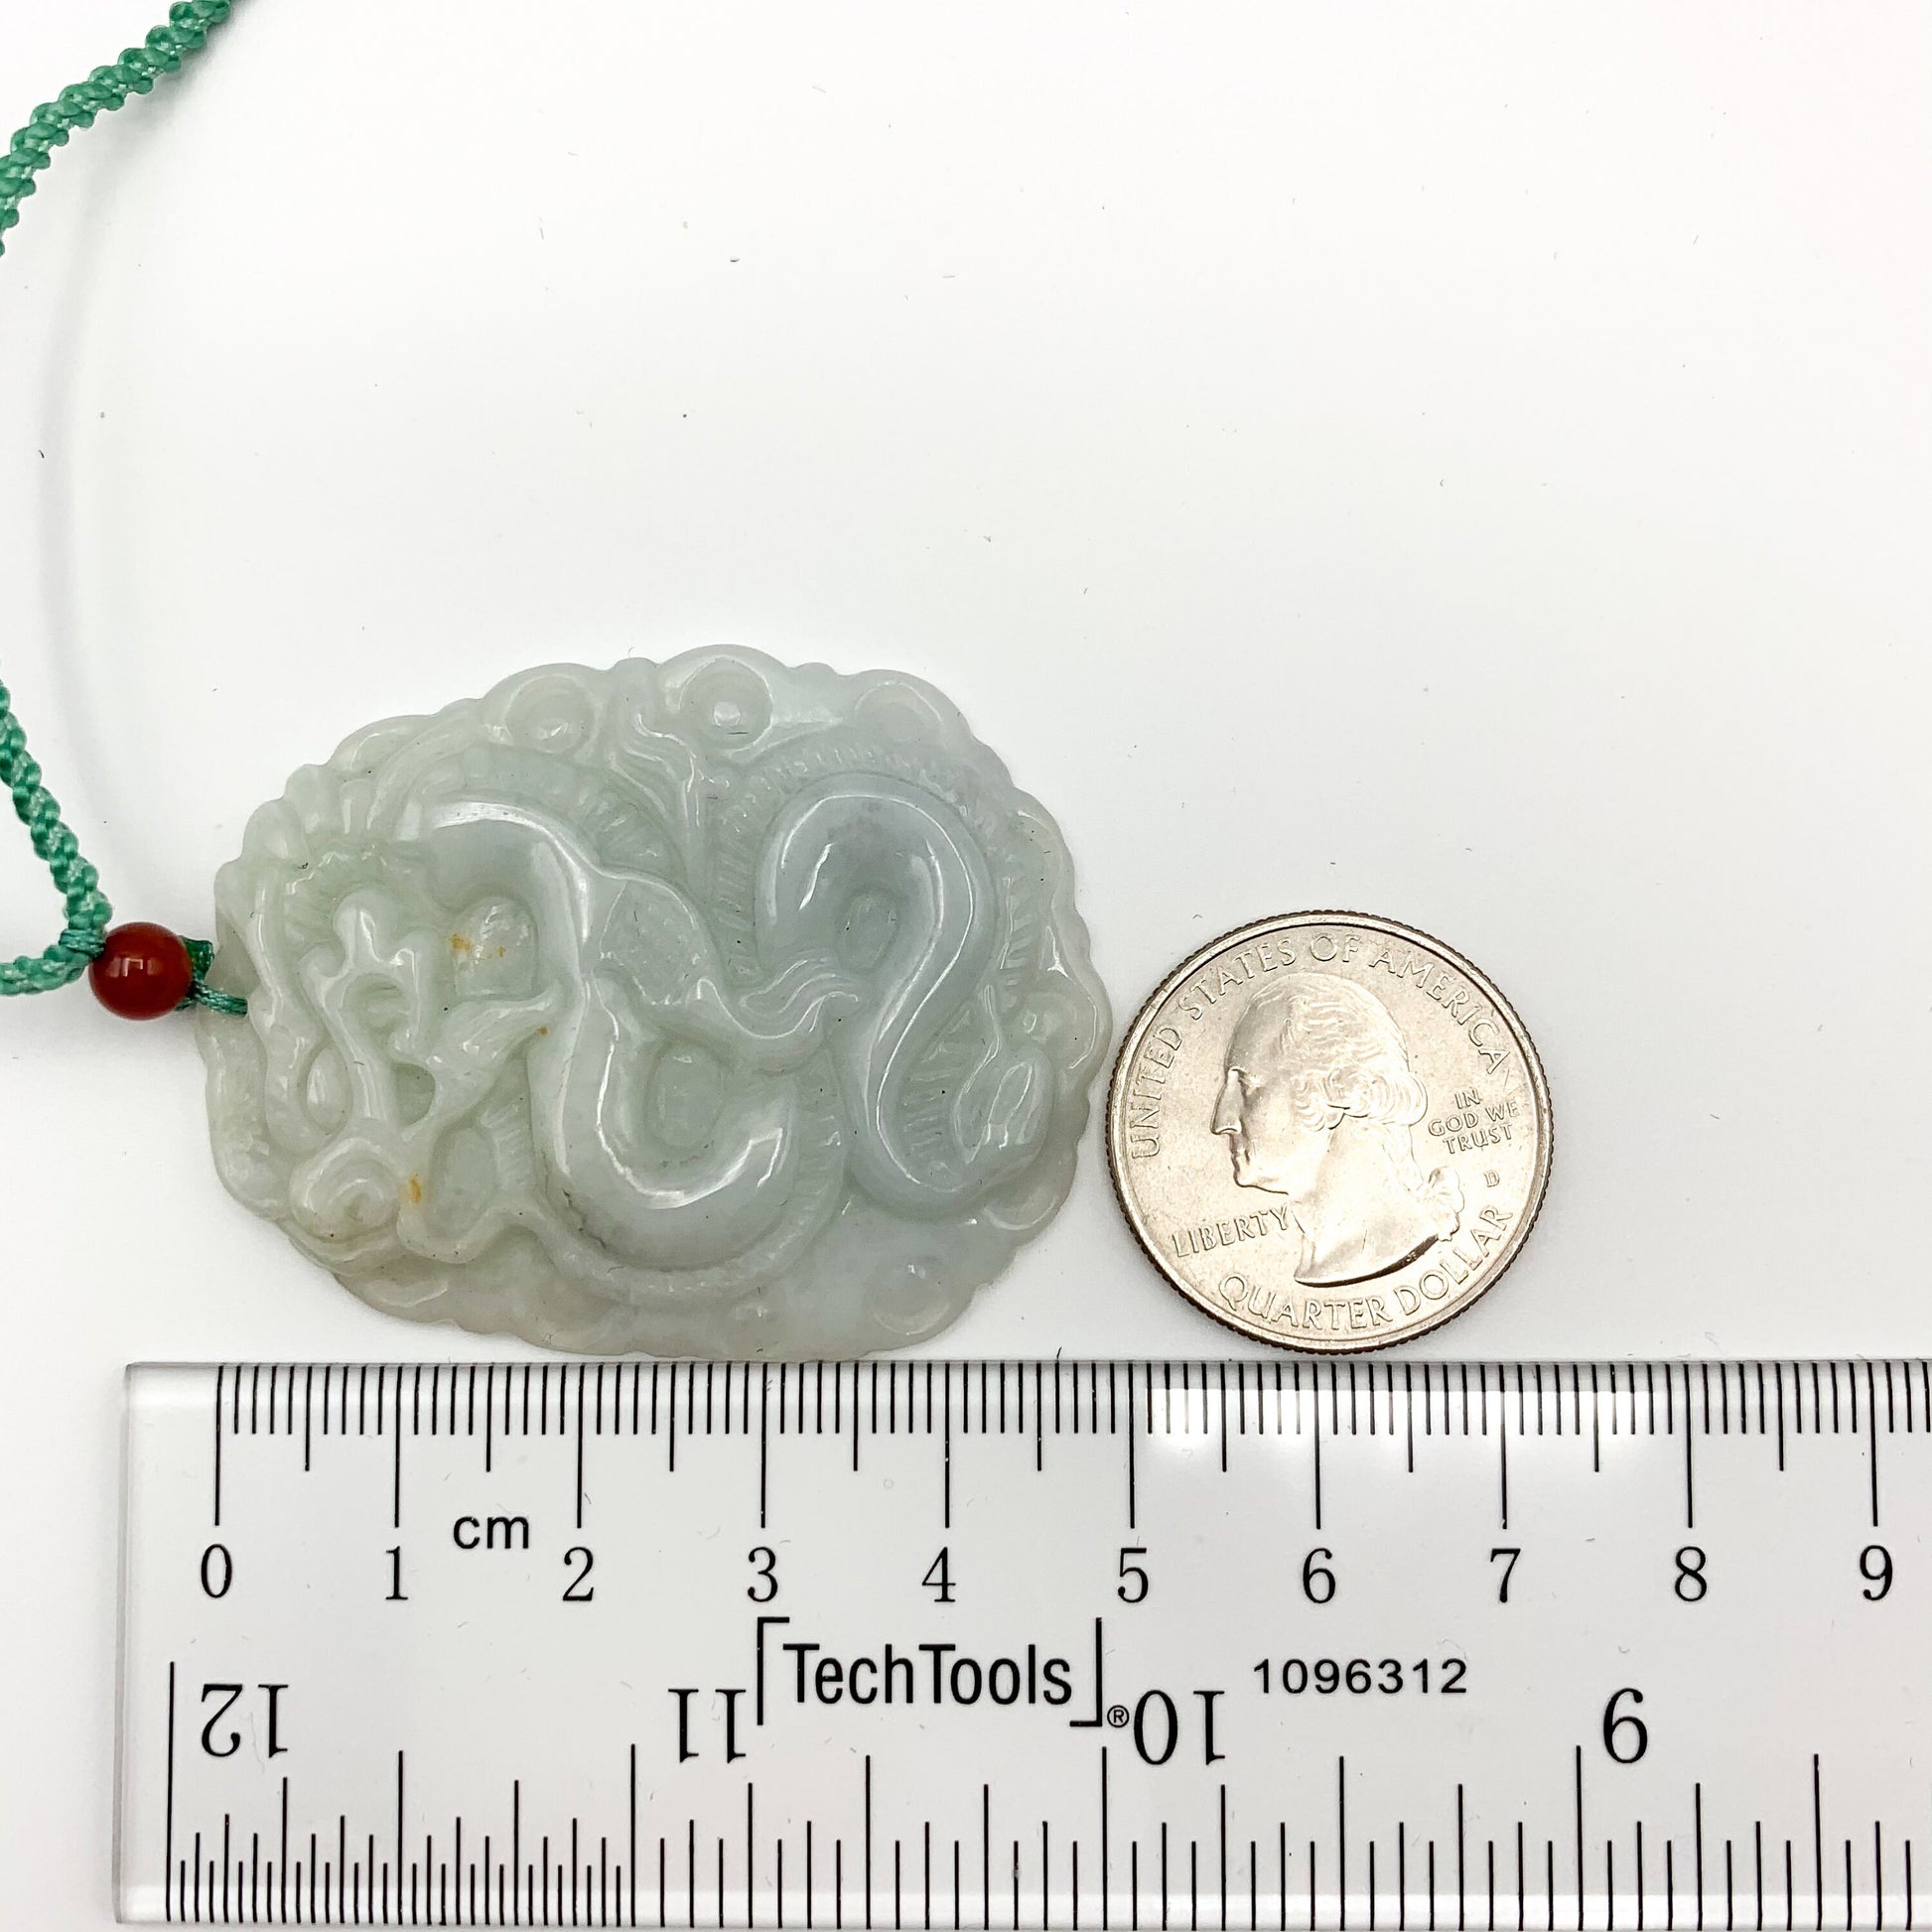 Jadeite Jade Dragon Chinese Zodiac Hand Carved Pendant Necklace, YJ-0321-0333032 - AriaDesignCollection